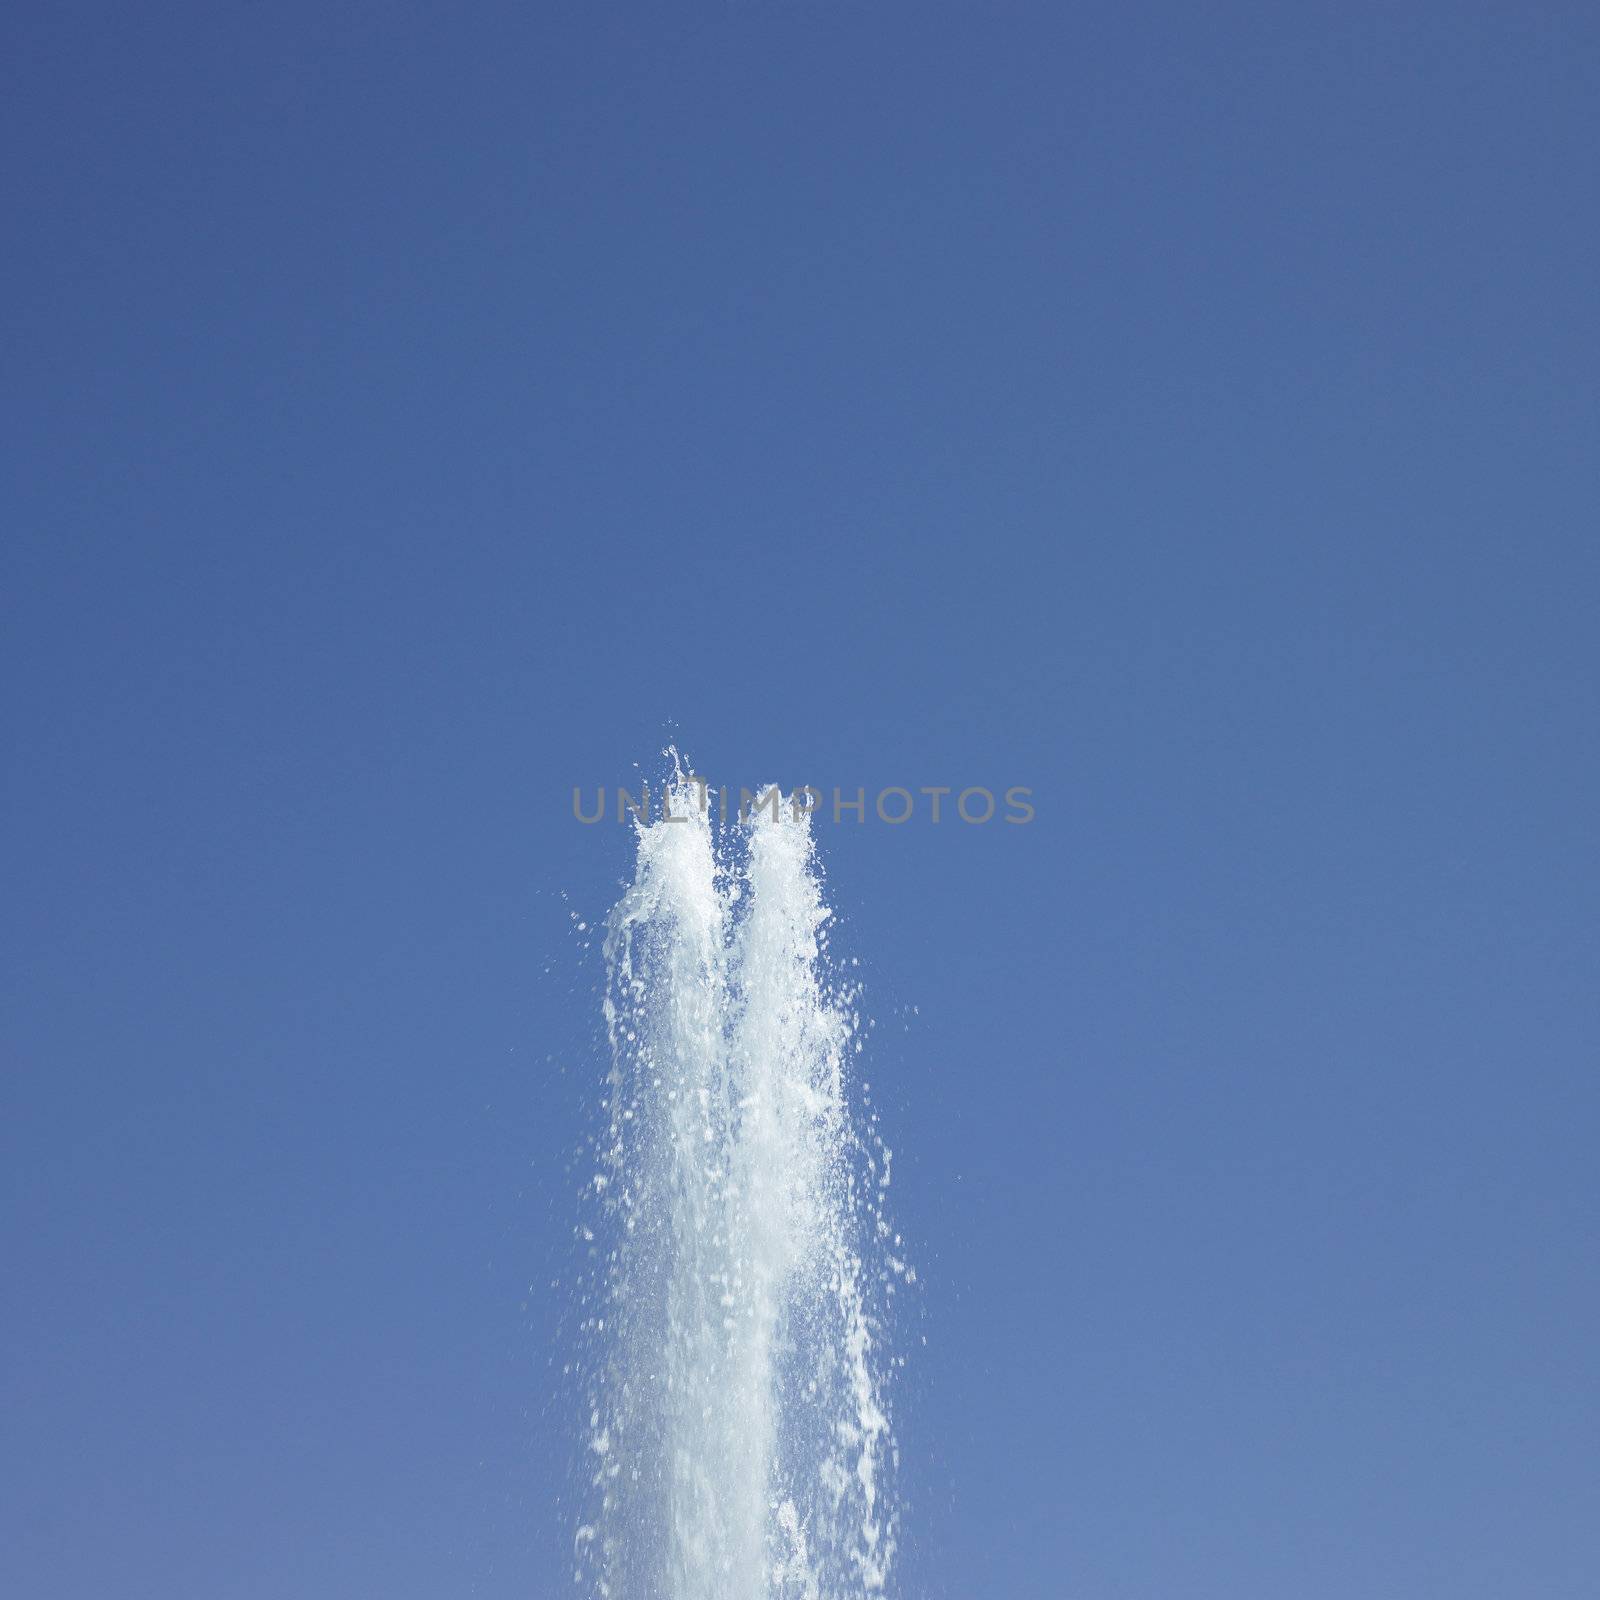 Fountain in the blue sky